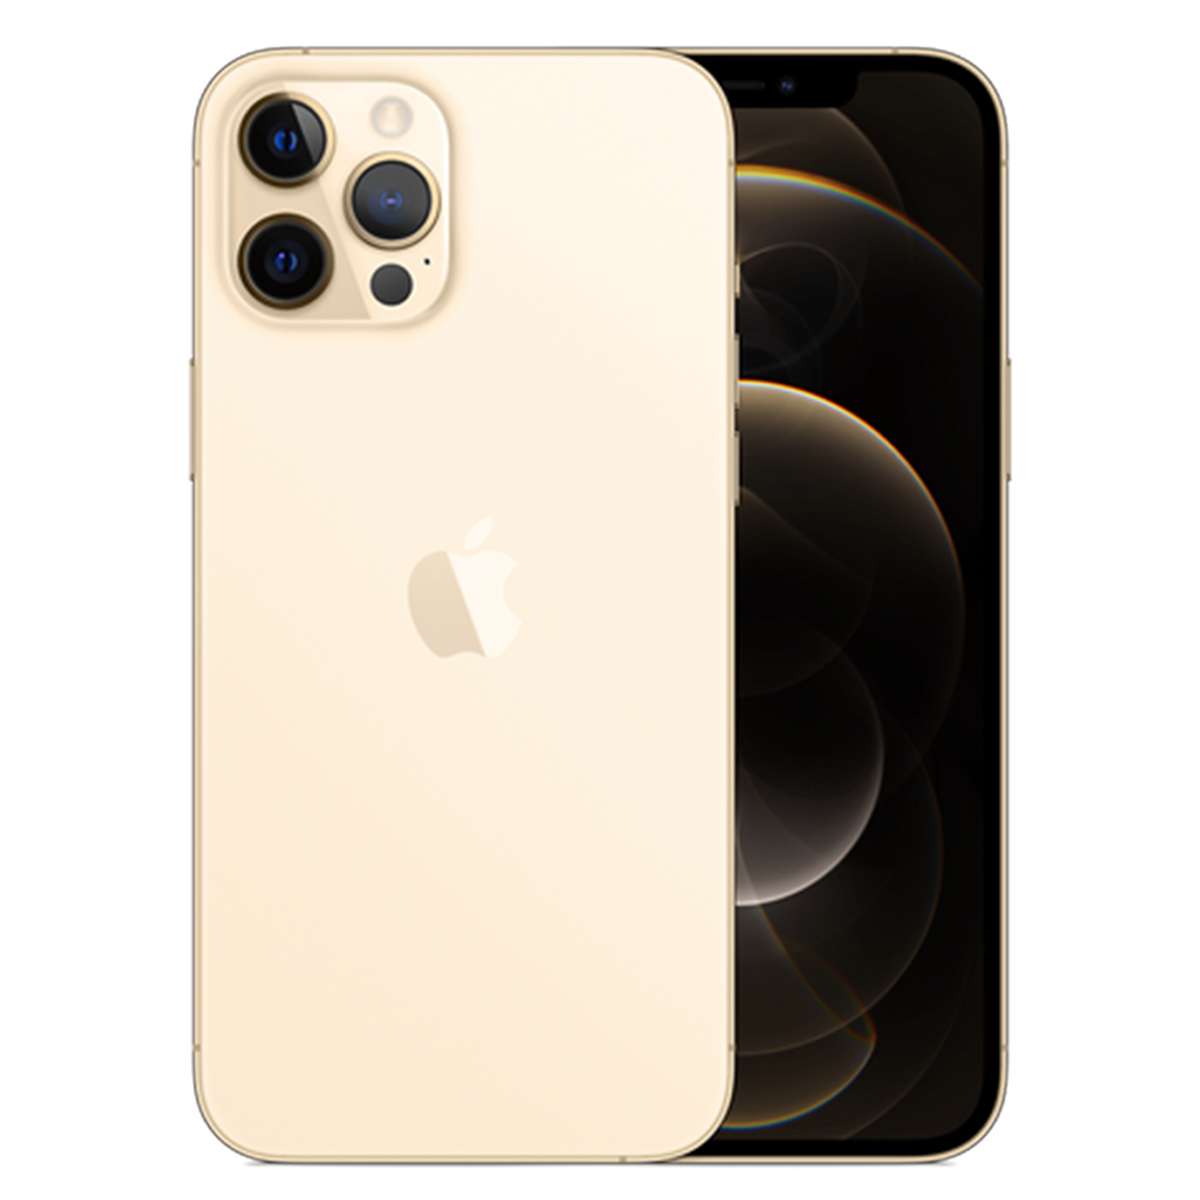 iPhone 12 Pro Max, Gold, 512GB (Official Stock)